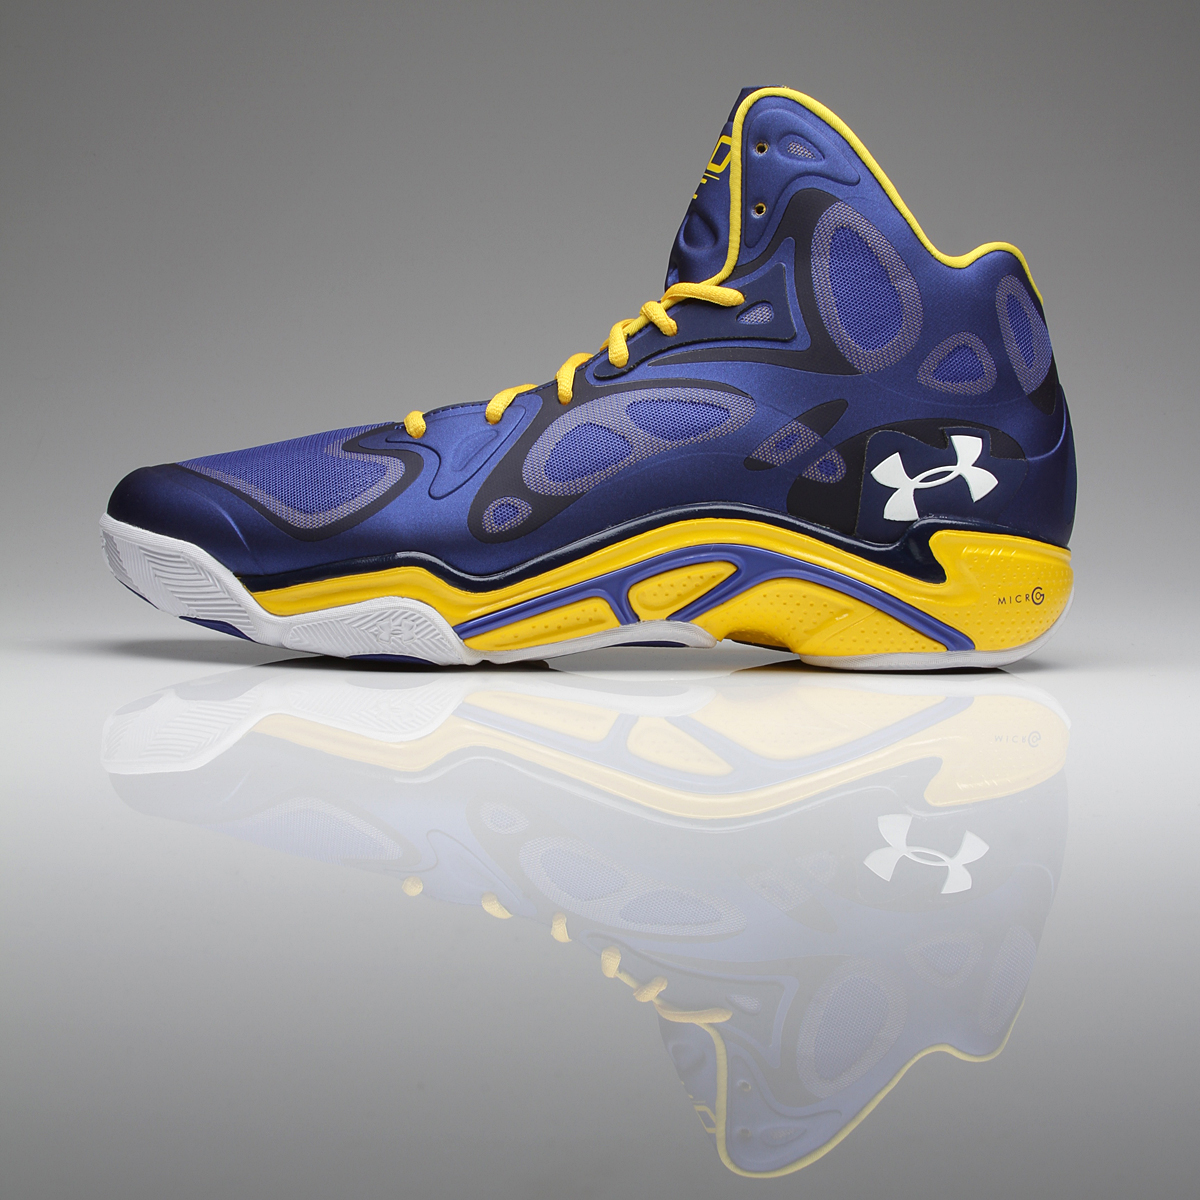 UA curry 2 low shoes For Sale Philippines Find 2nd Hand (Used) UA 